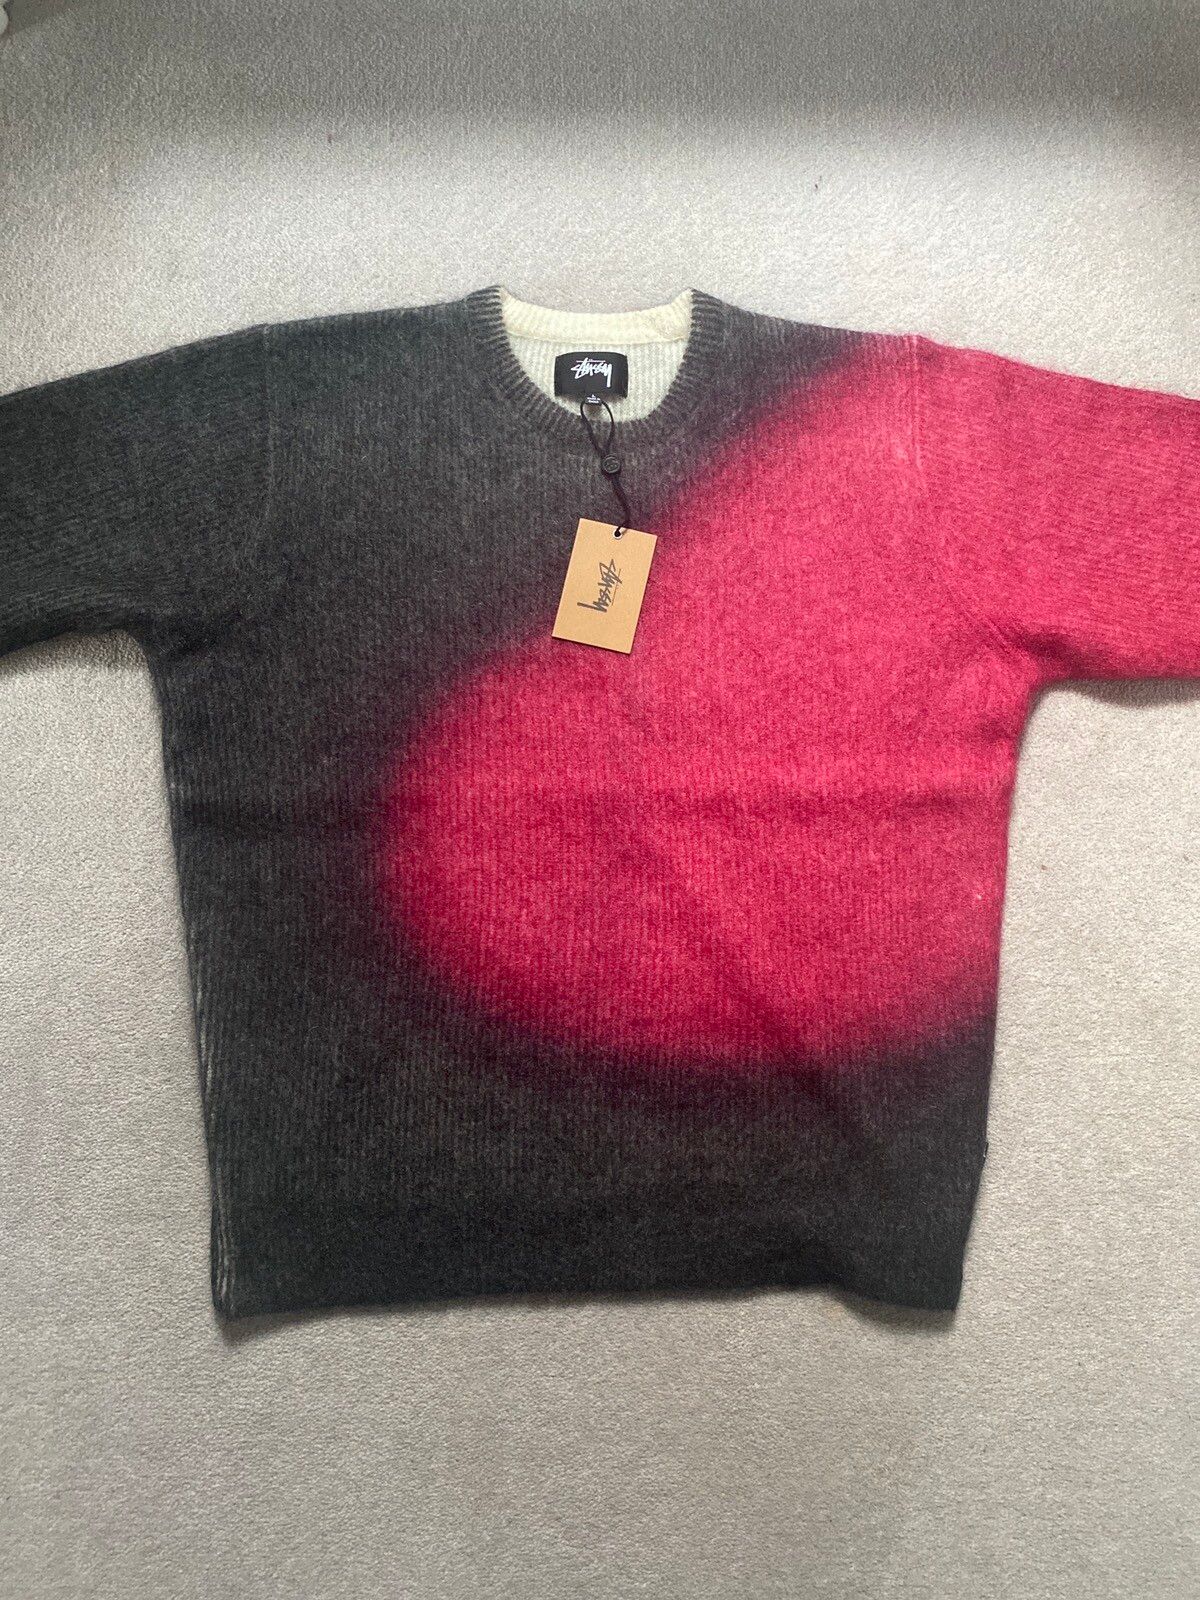 Stussy Brushed dot sweater | Grailed